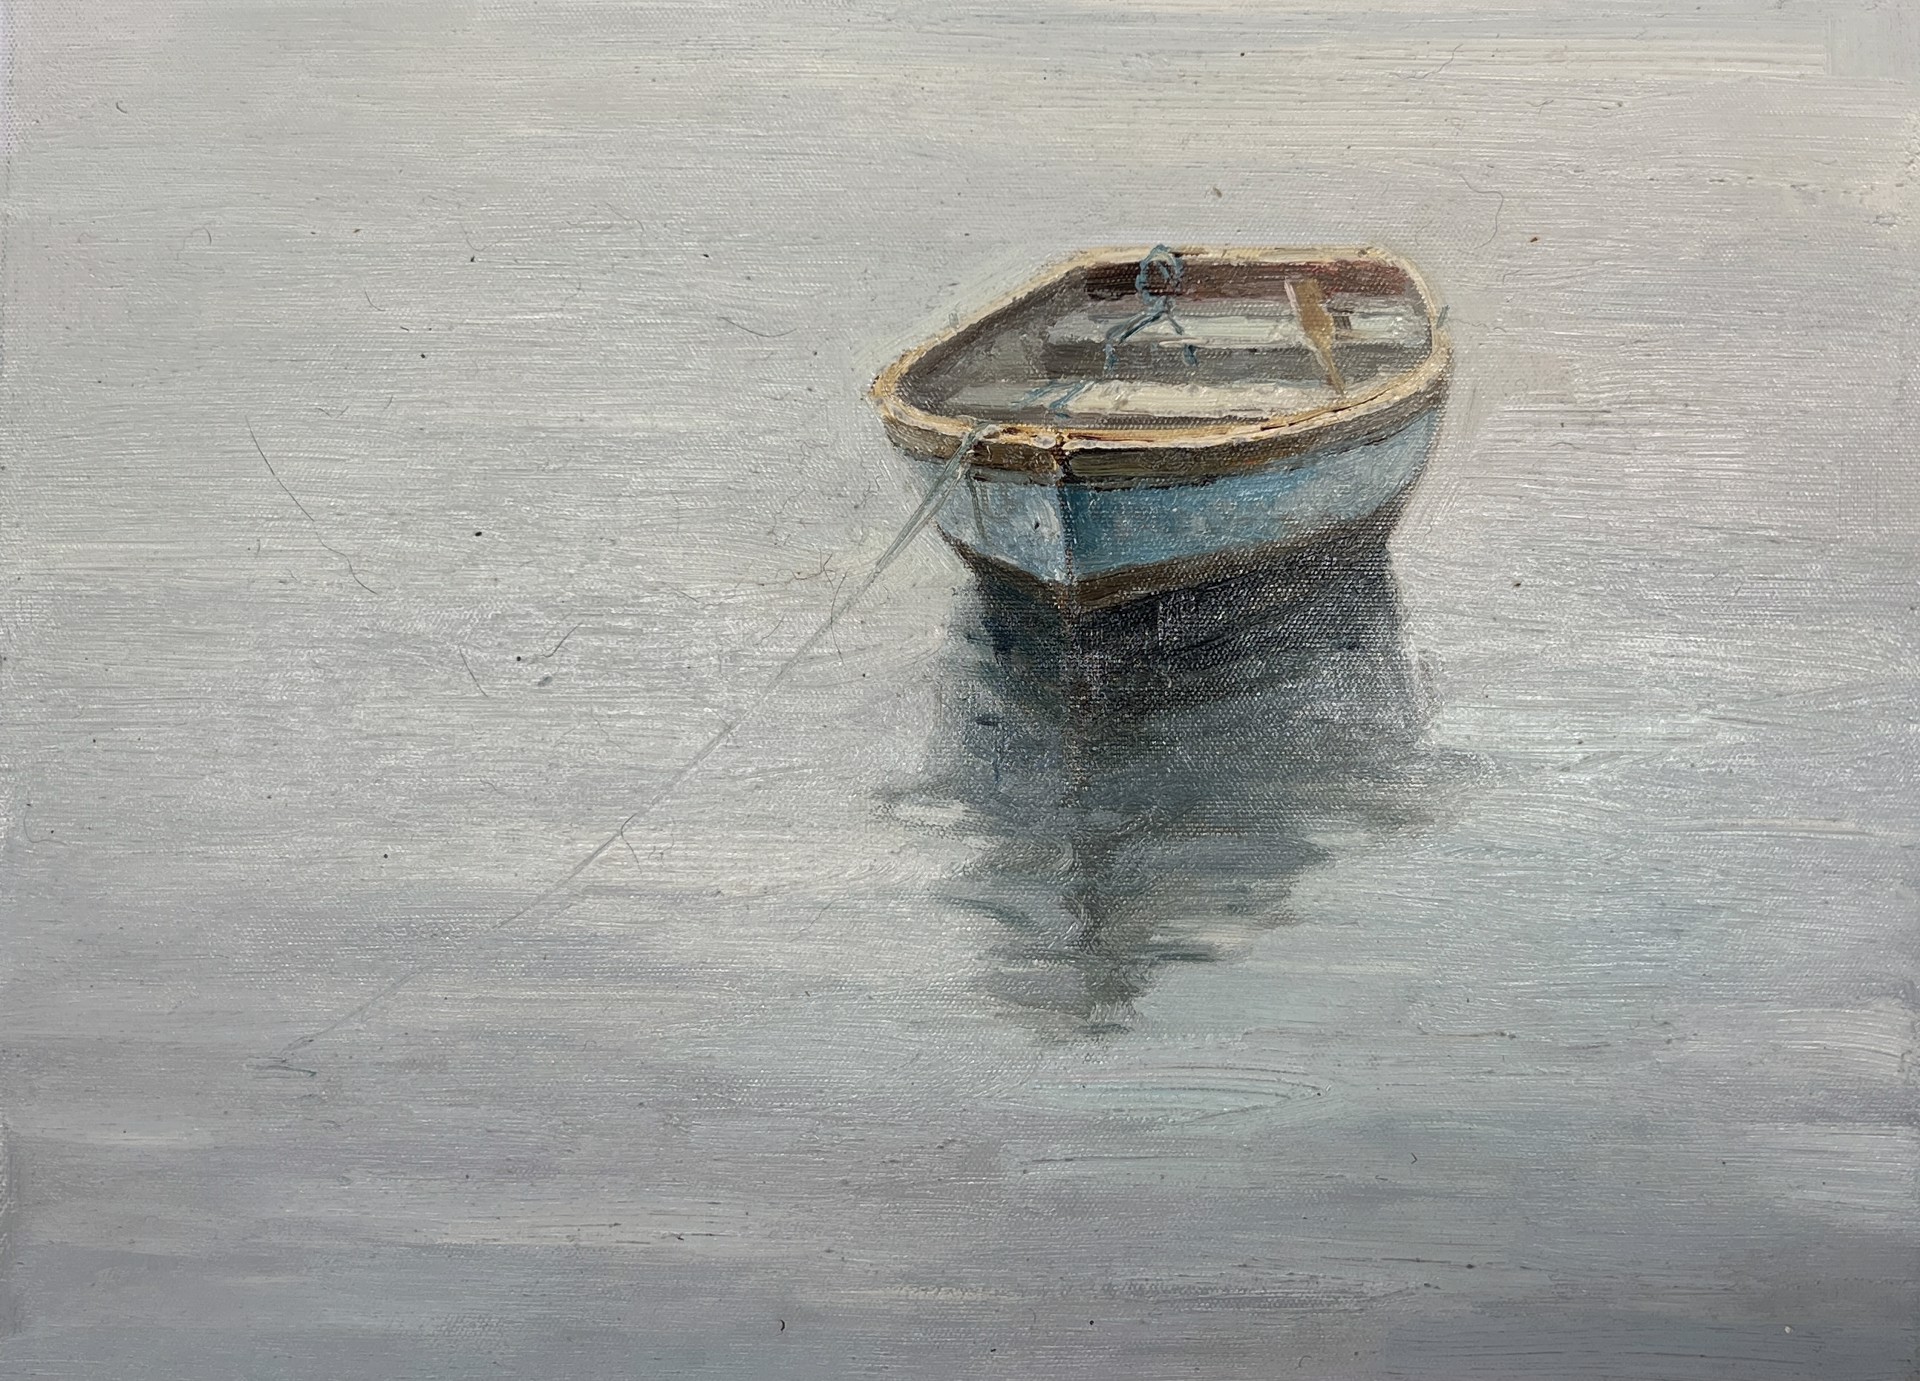 BLUE AND TAN BOAT by ERIC SUN